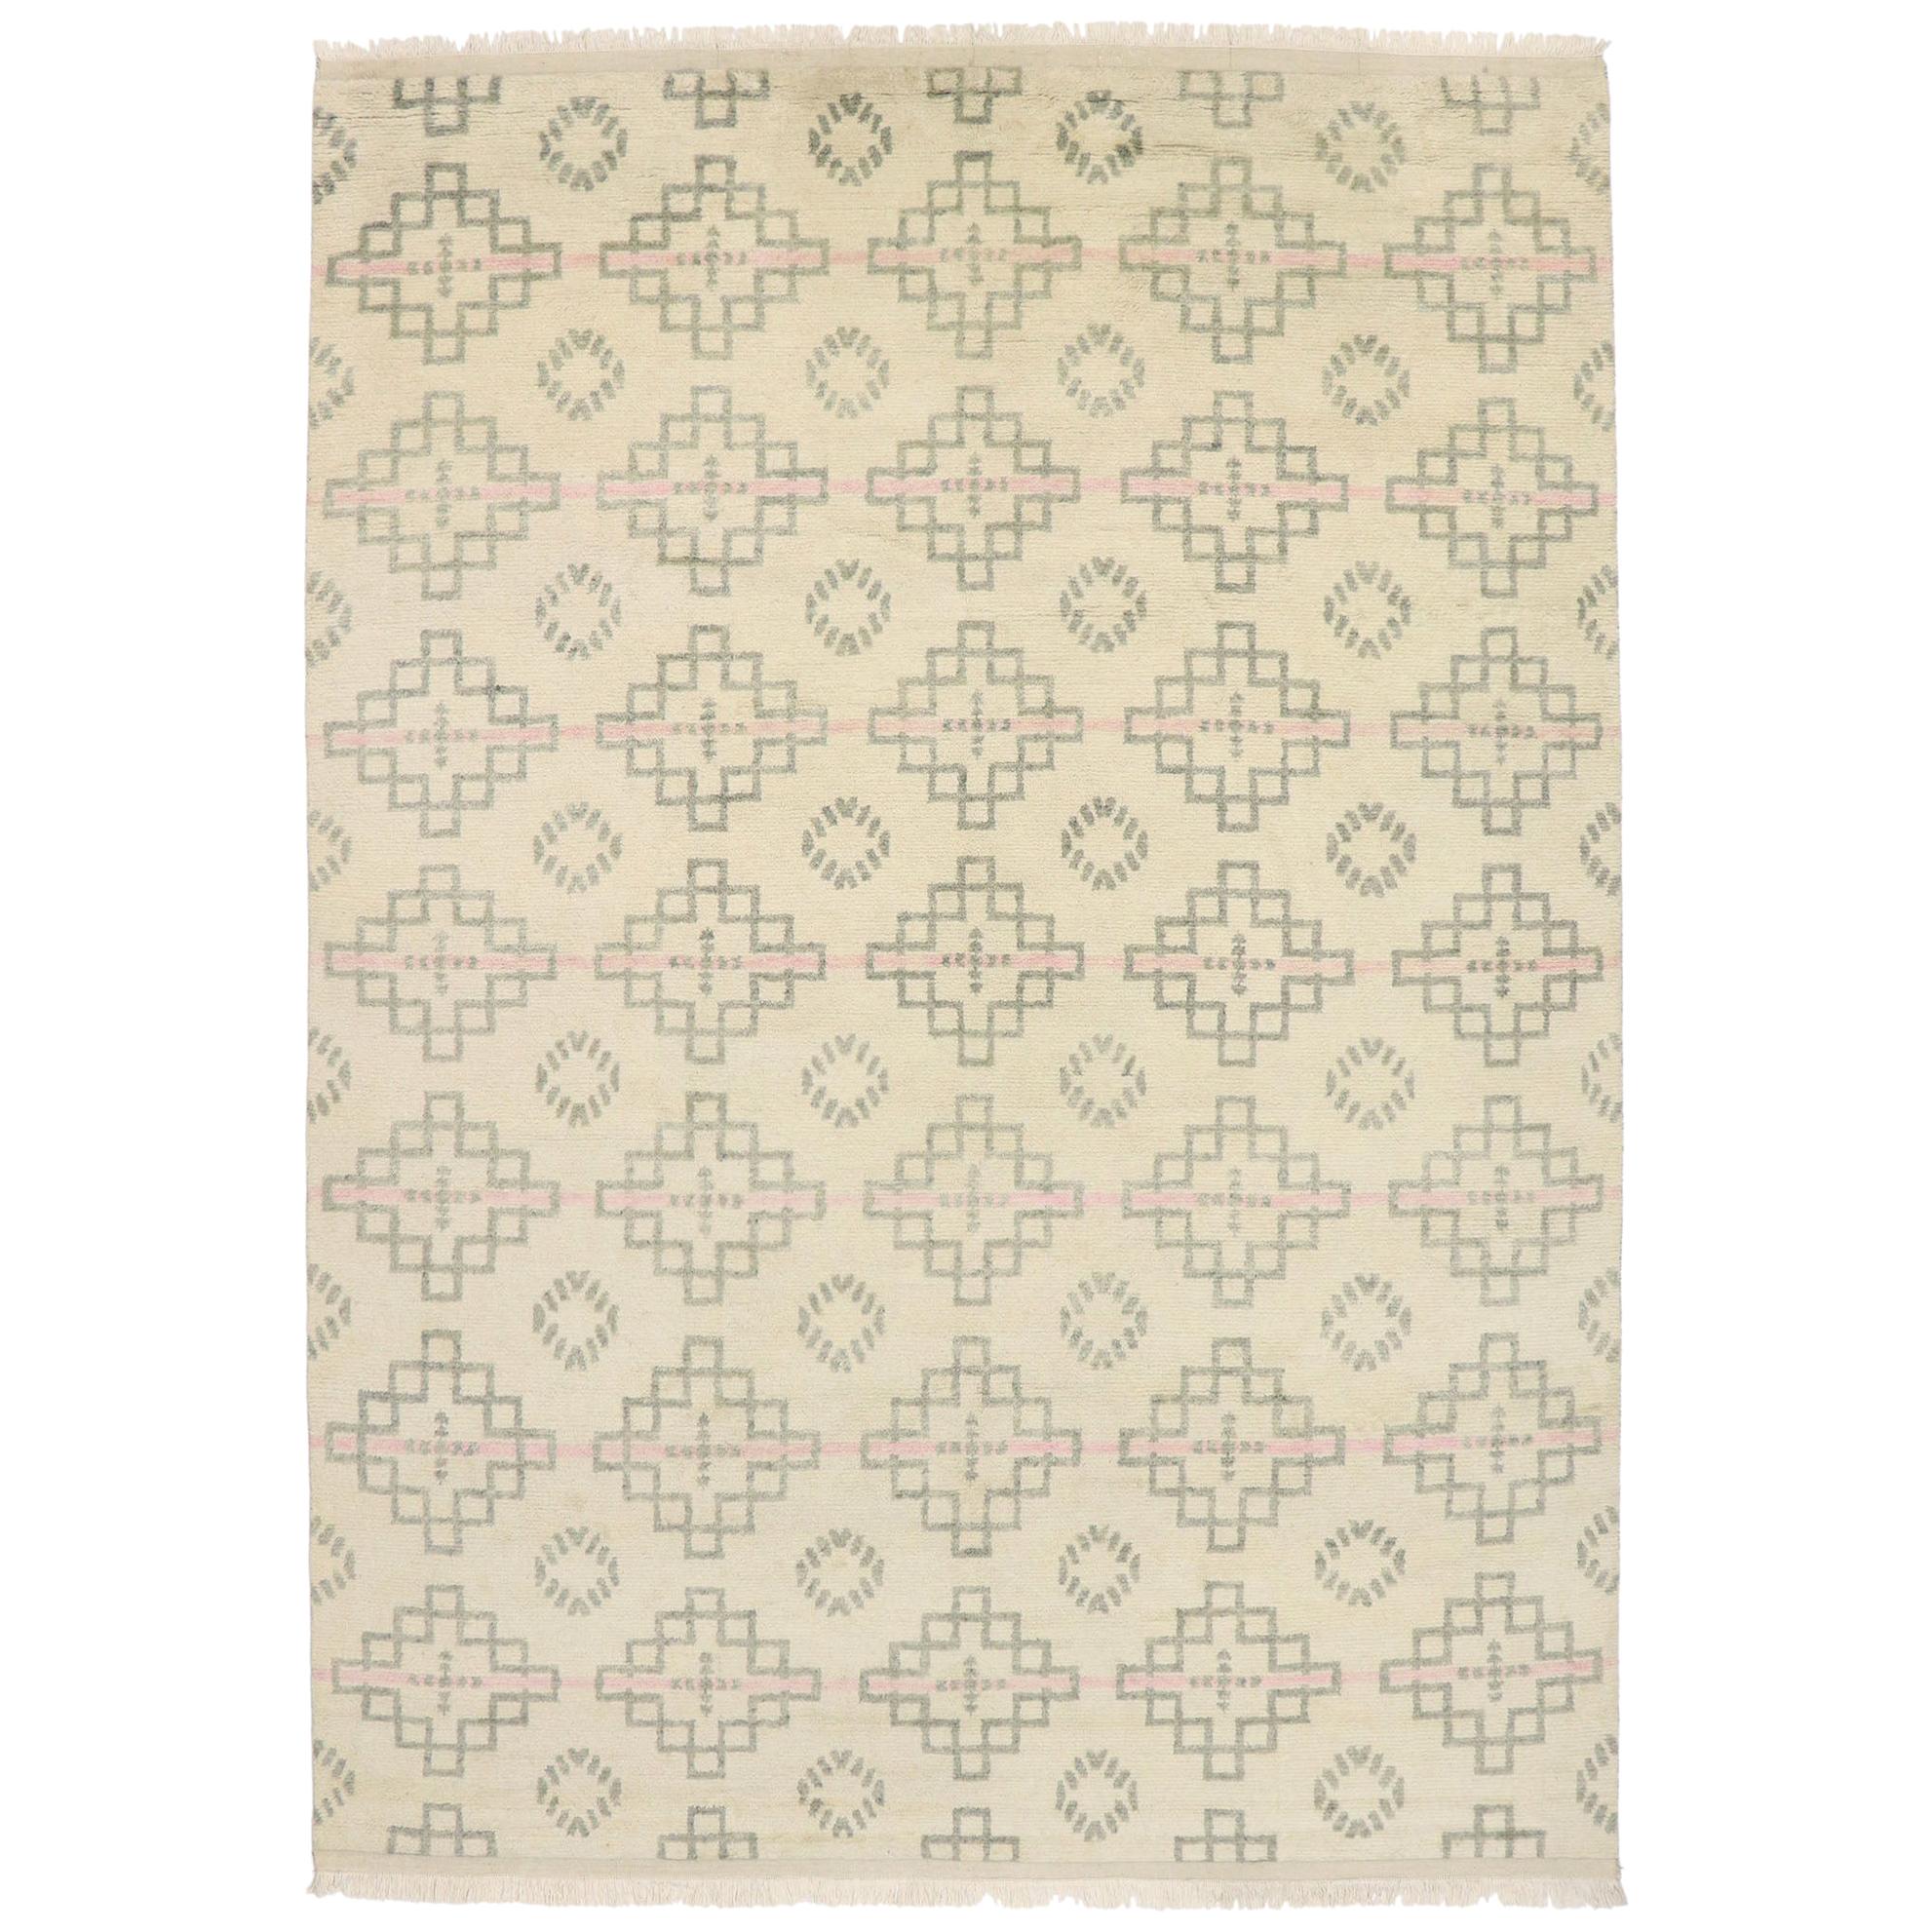 New Contemporary Moroccan Style Rug with Postmodern Cubist Style